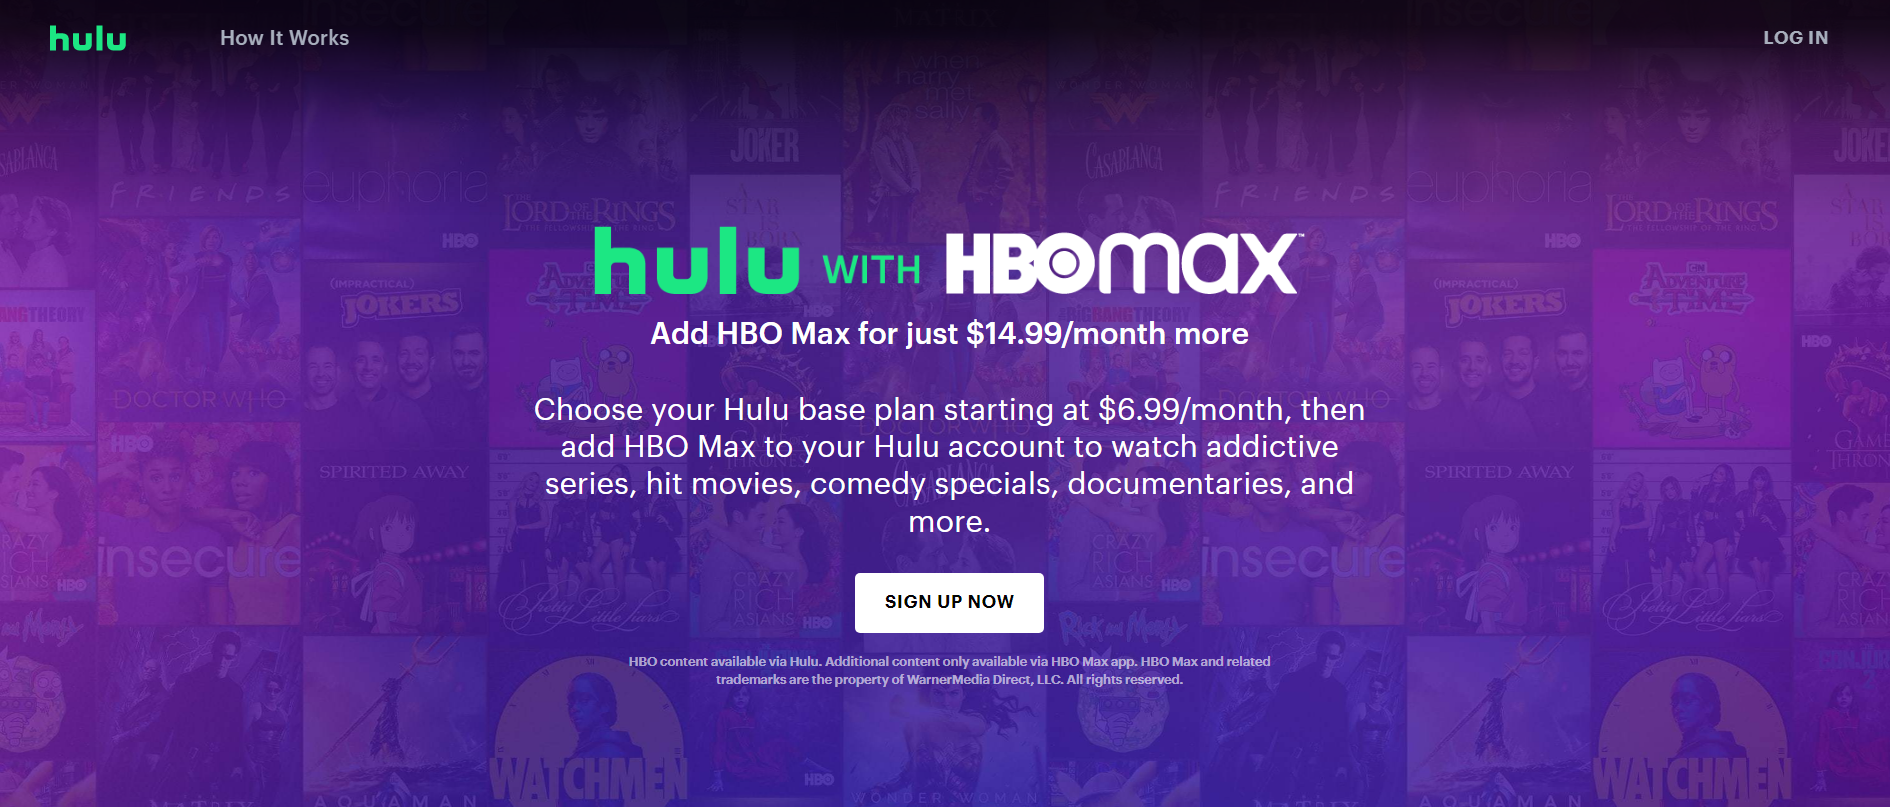 HBO Max add-on